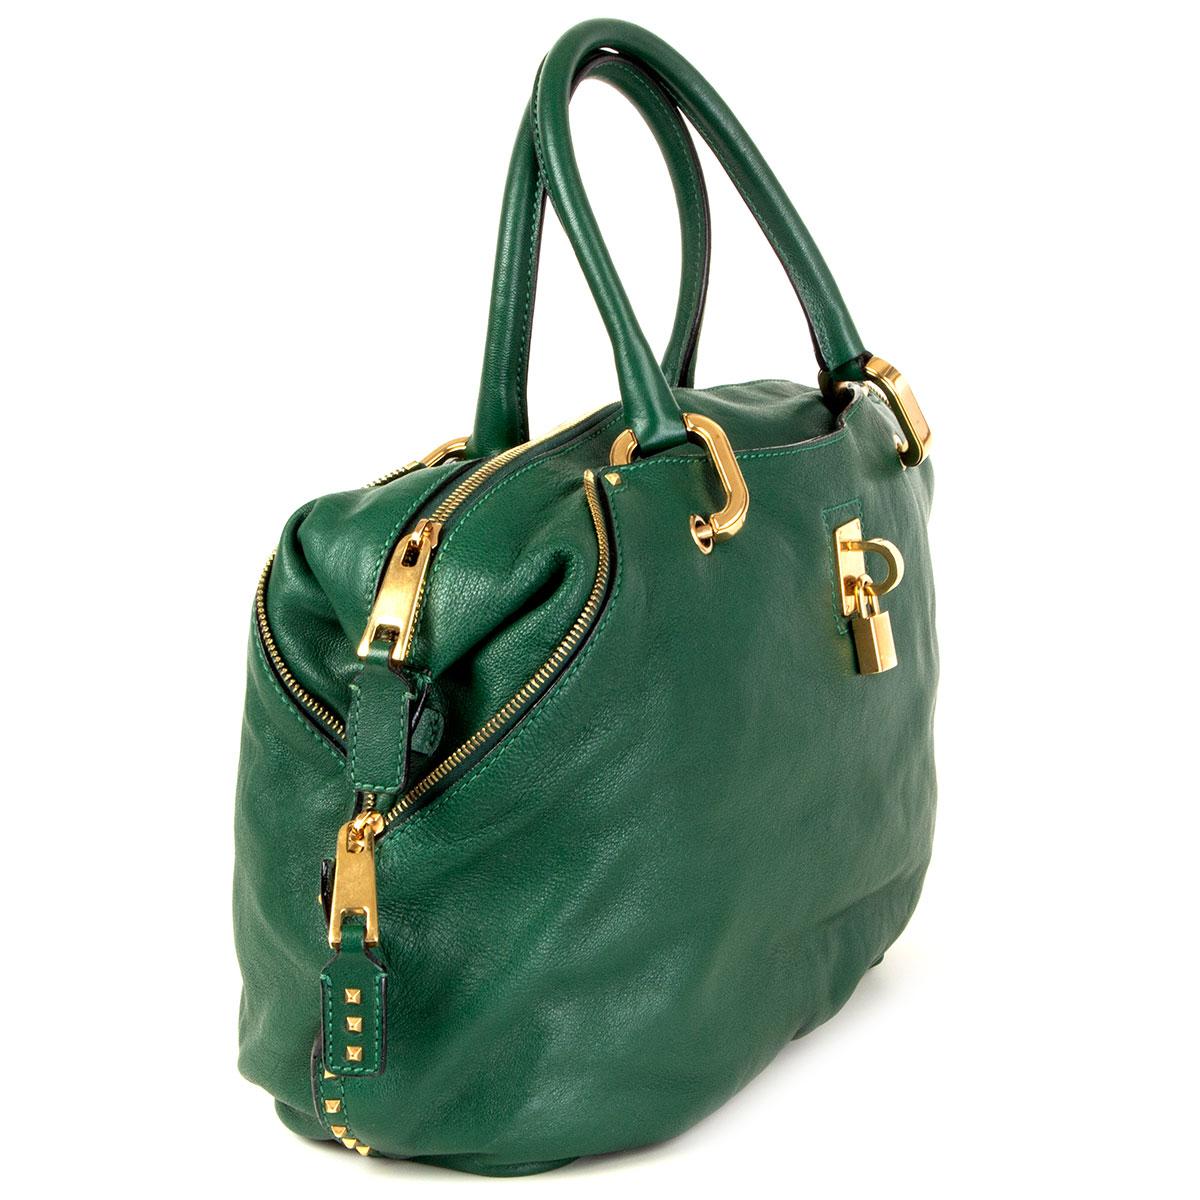 100% authentic Marc Jacobs 'Paradise Rio' bag in forest green calfskin featuring gold-tone hardware with two big side pockets. Opens with a zipper on top and is lined in grey canvas with one zipper pocket against the back and one open pocket against